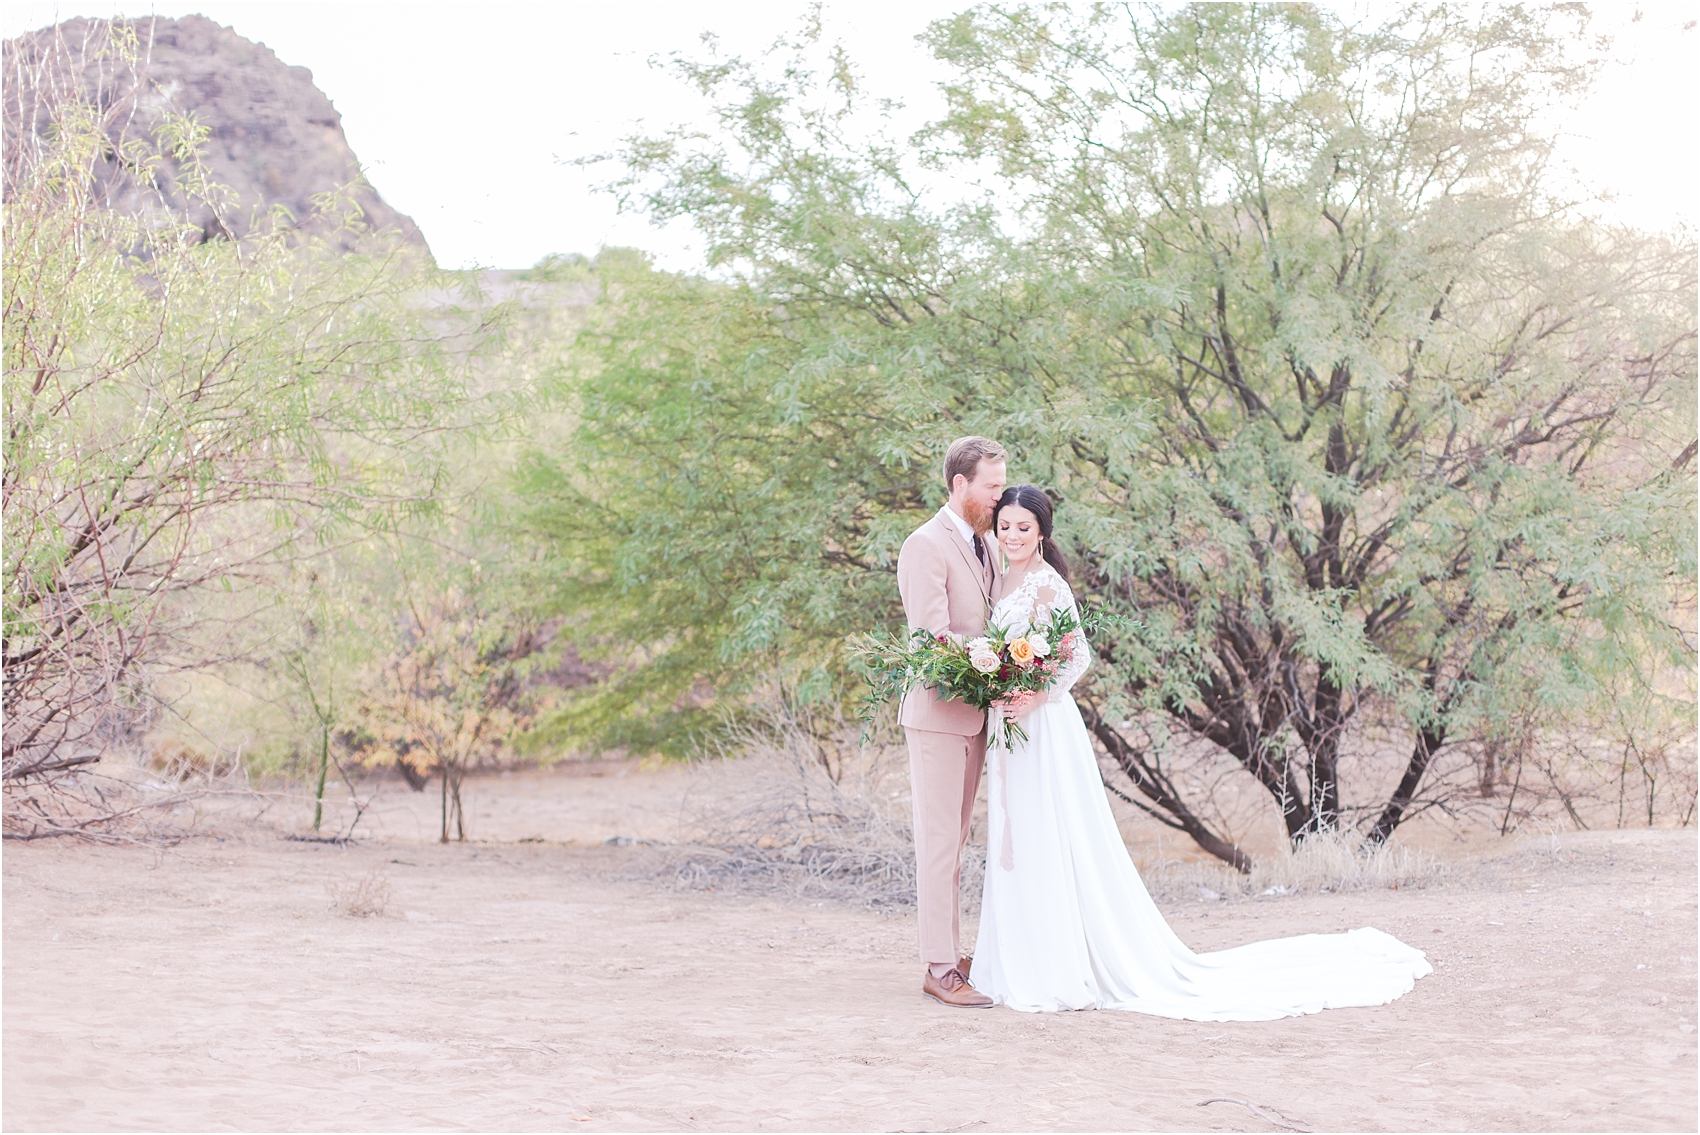 intimate-and-romantic-desert-wedding-photos-at-phoenix-marriott-tempe-at-the-buttes-in-tempe-arizona-by-courtney-carolyn-photography_0003.jpg